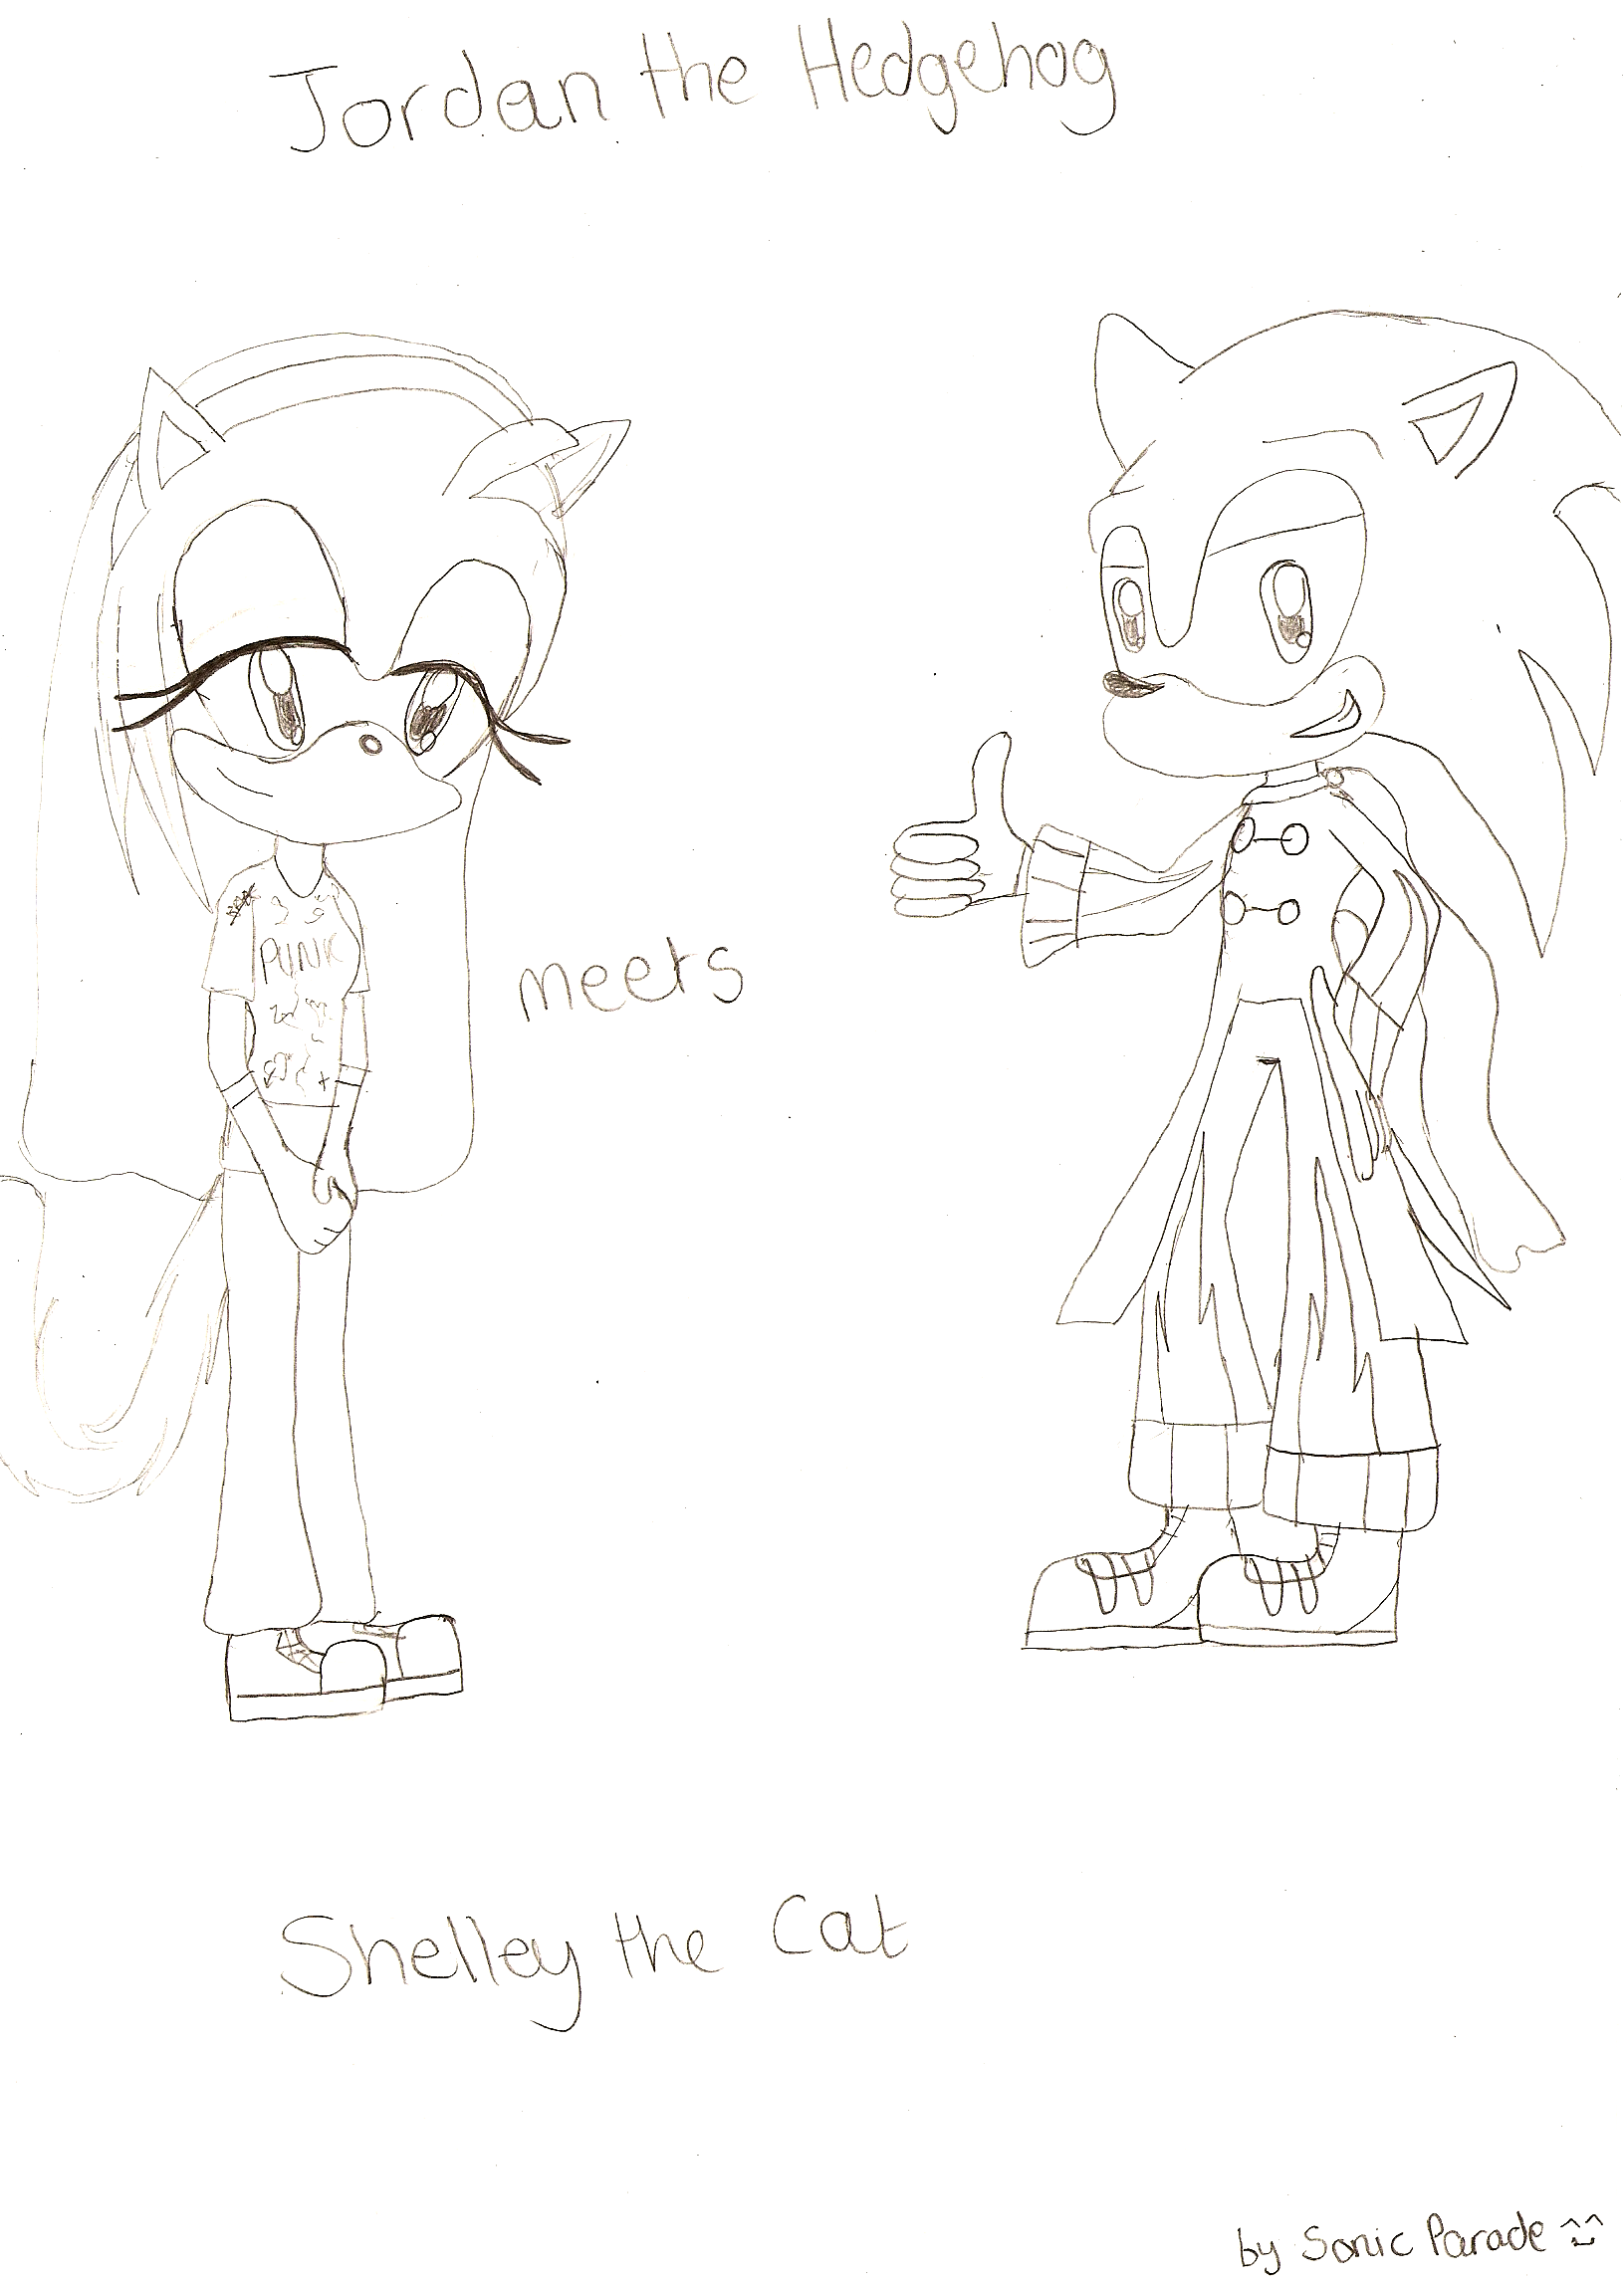 Jordan the Hedgehog meets Shelley the Cat by sonicparade